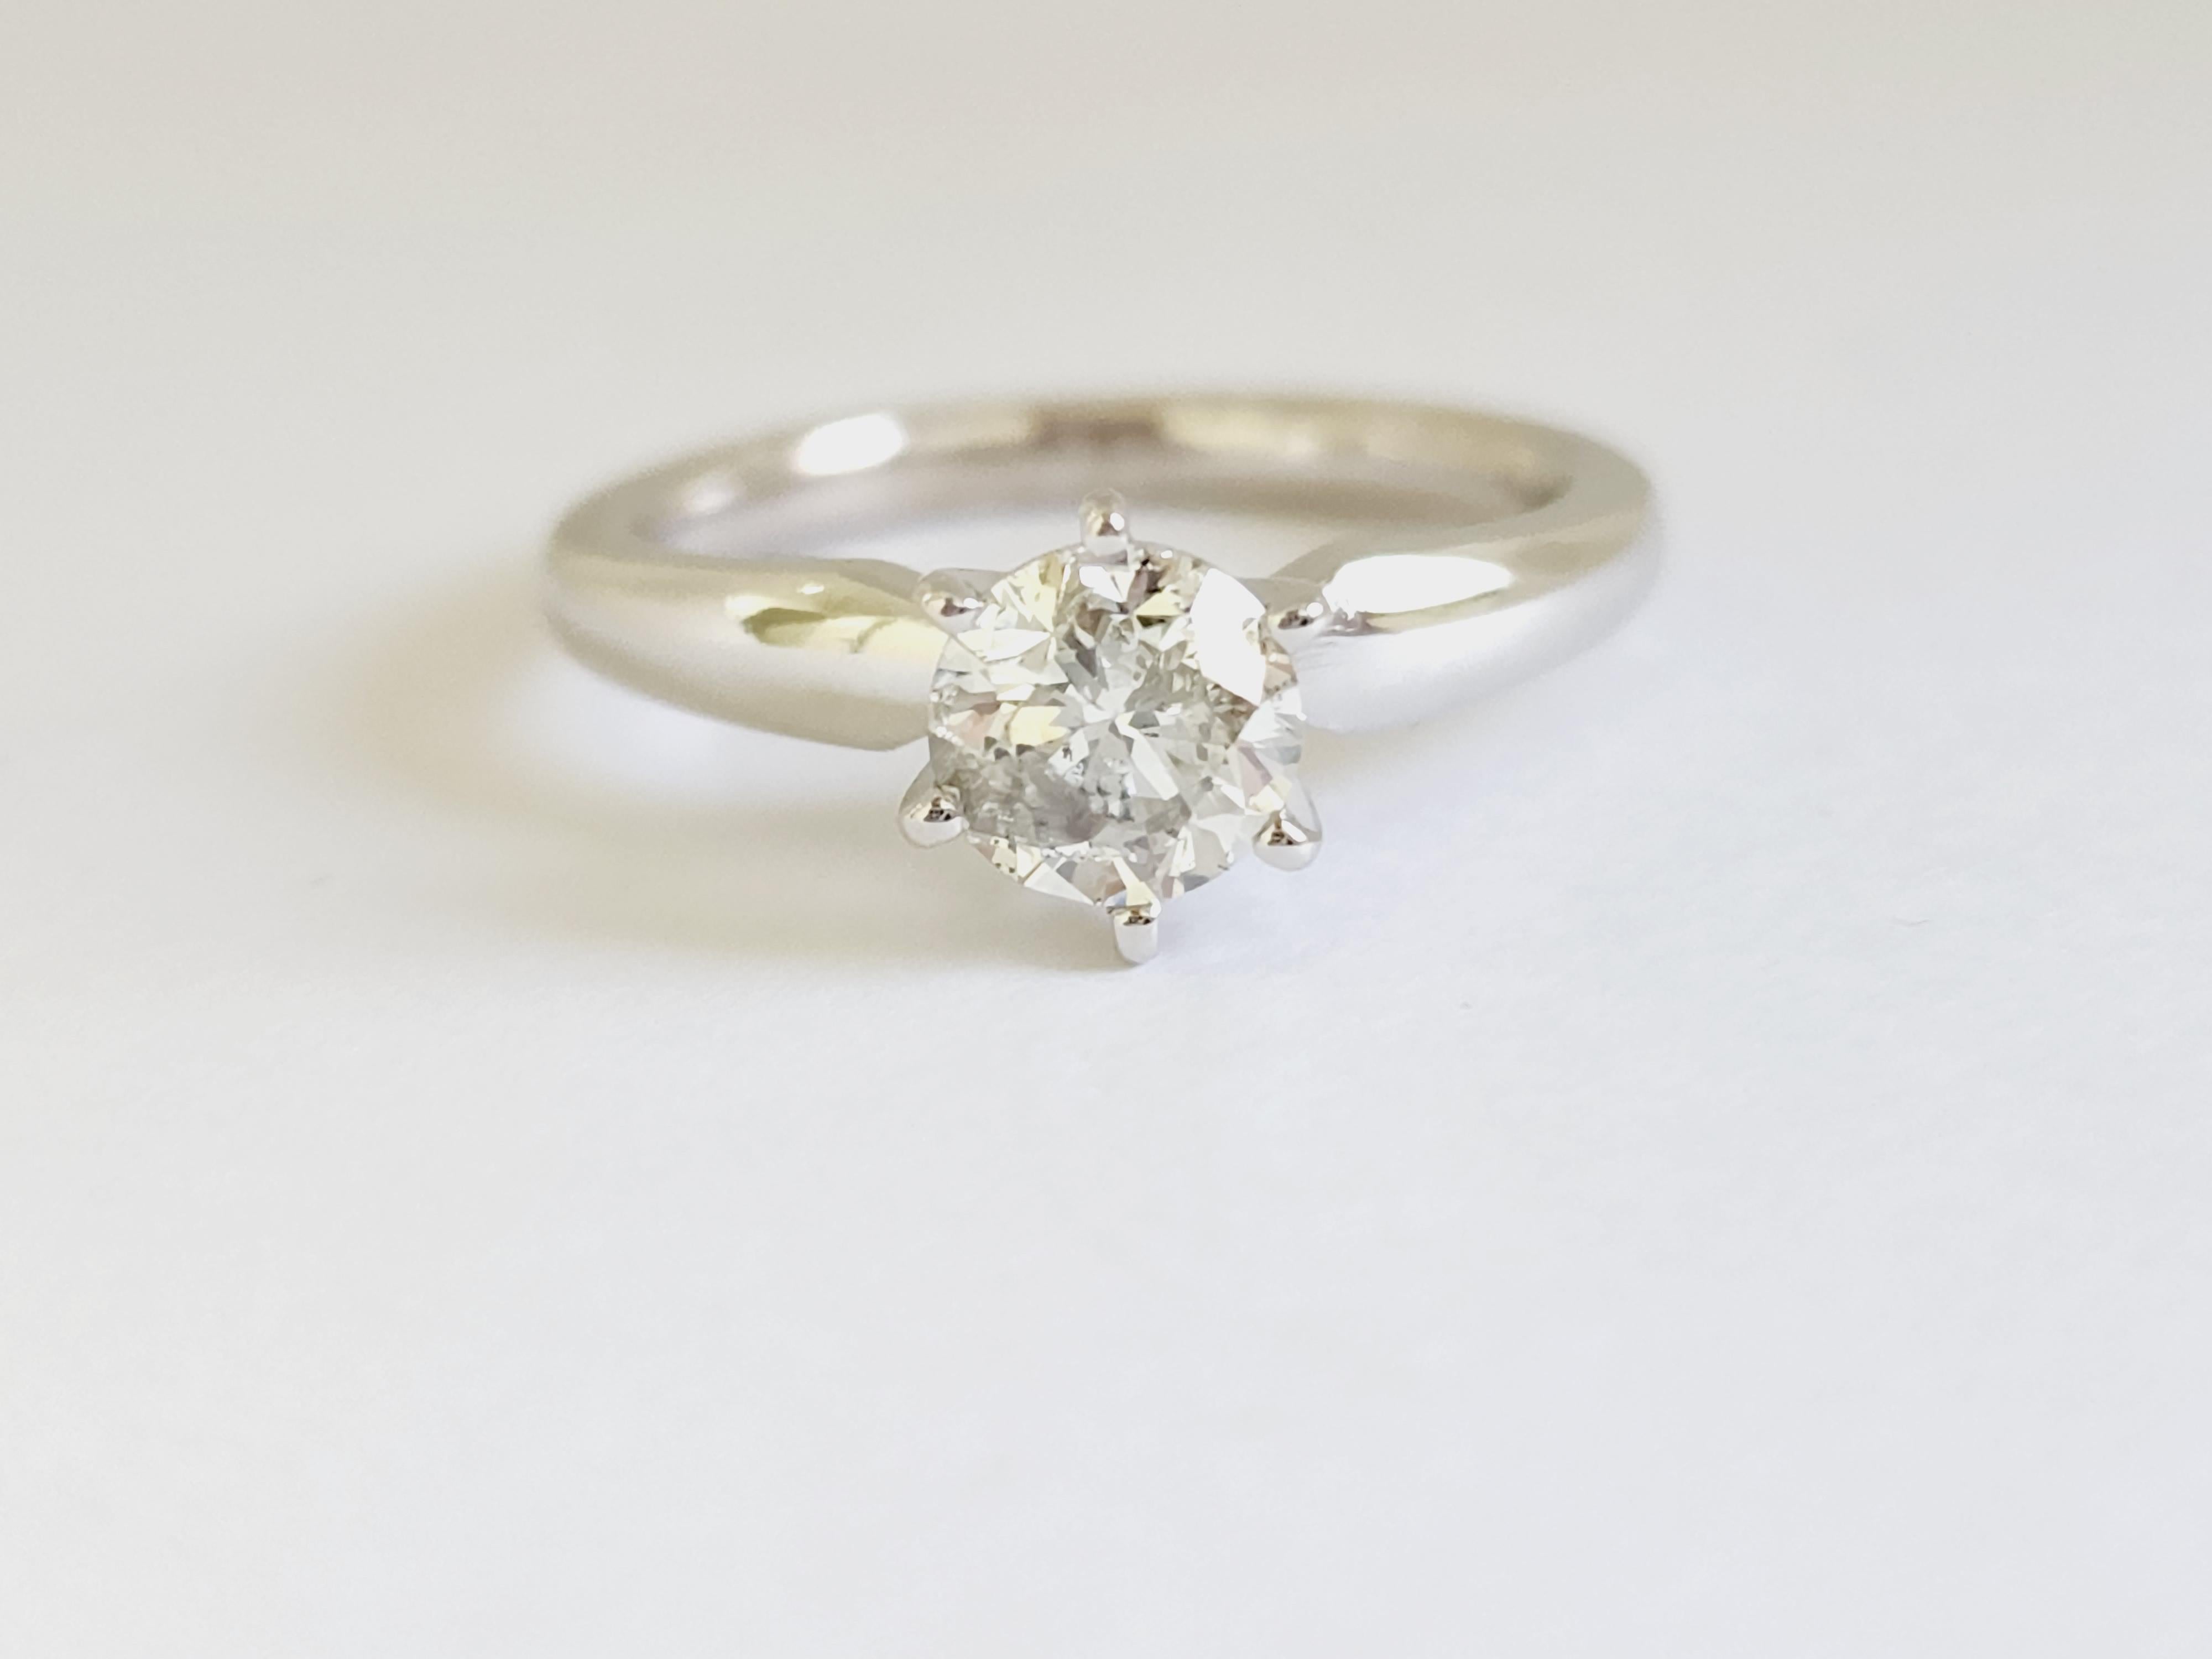 0.97 ct round brilliant cut natural diamonds. 6 prong solitaire setting, set in 14k white gold. Ring Size 6.5.